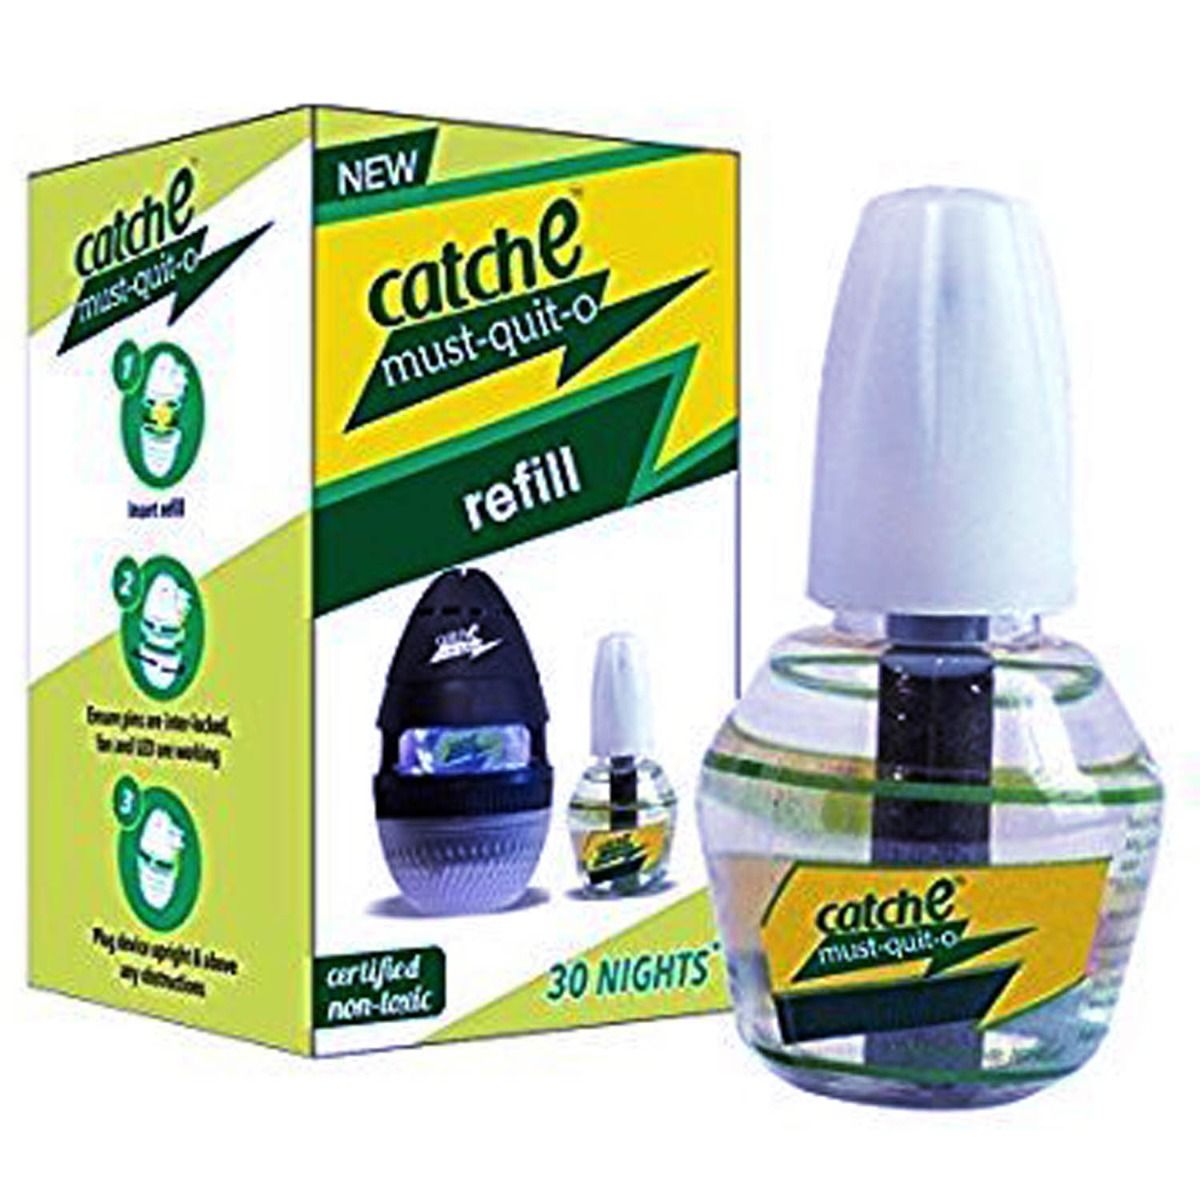 Buy Catche Must-Quit-O 30 Nights Refill 35ml Online